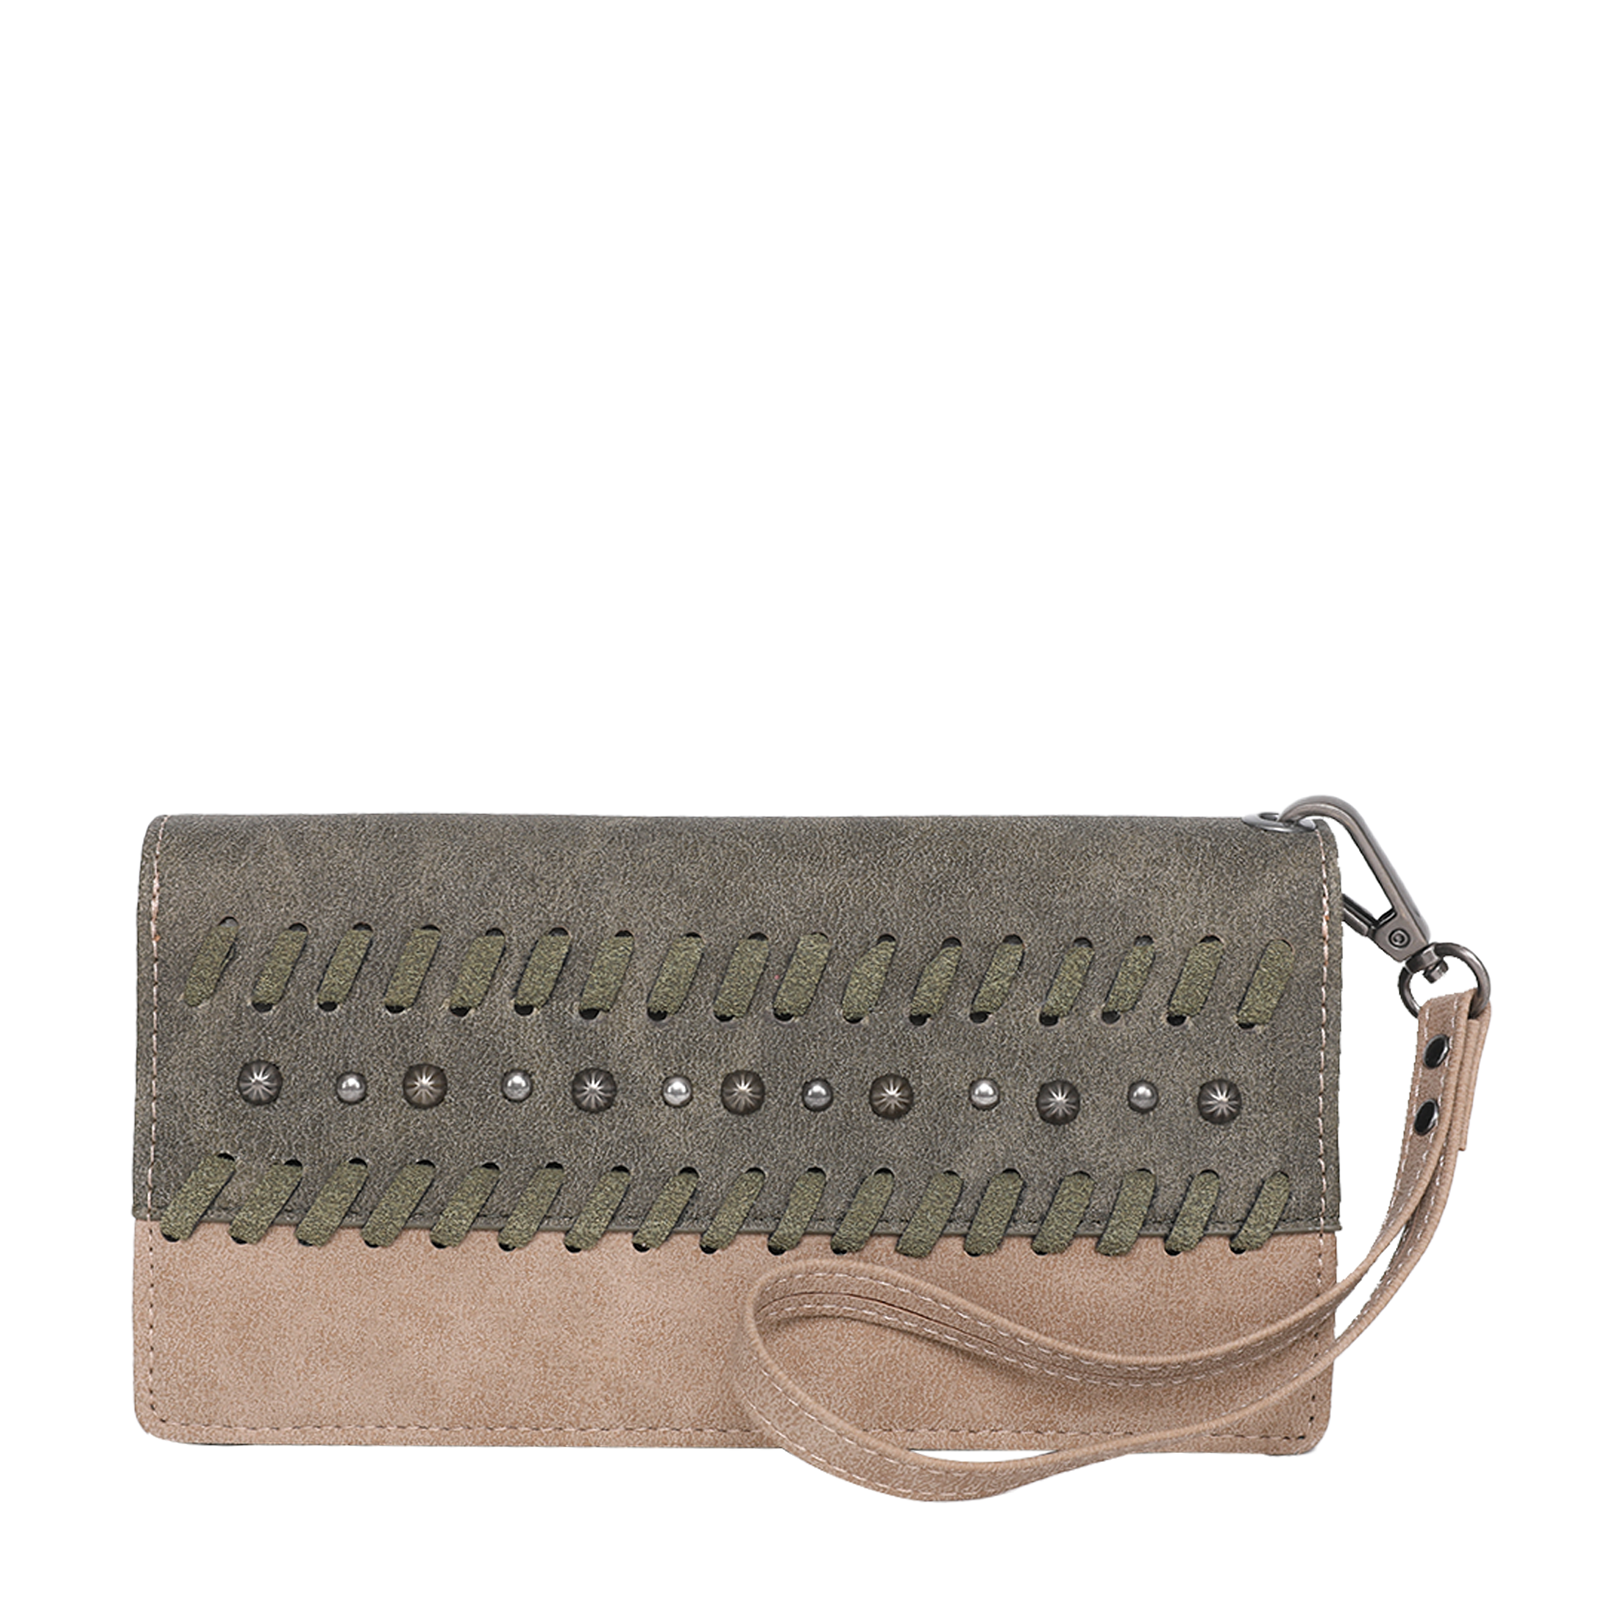 Wrangler Whipstitch and Studs Western Wallet - The Salty Mare